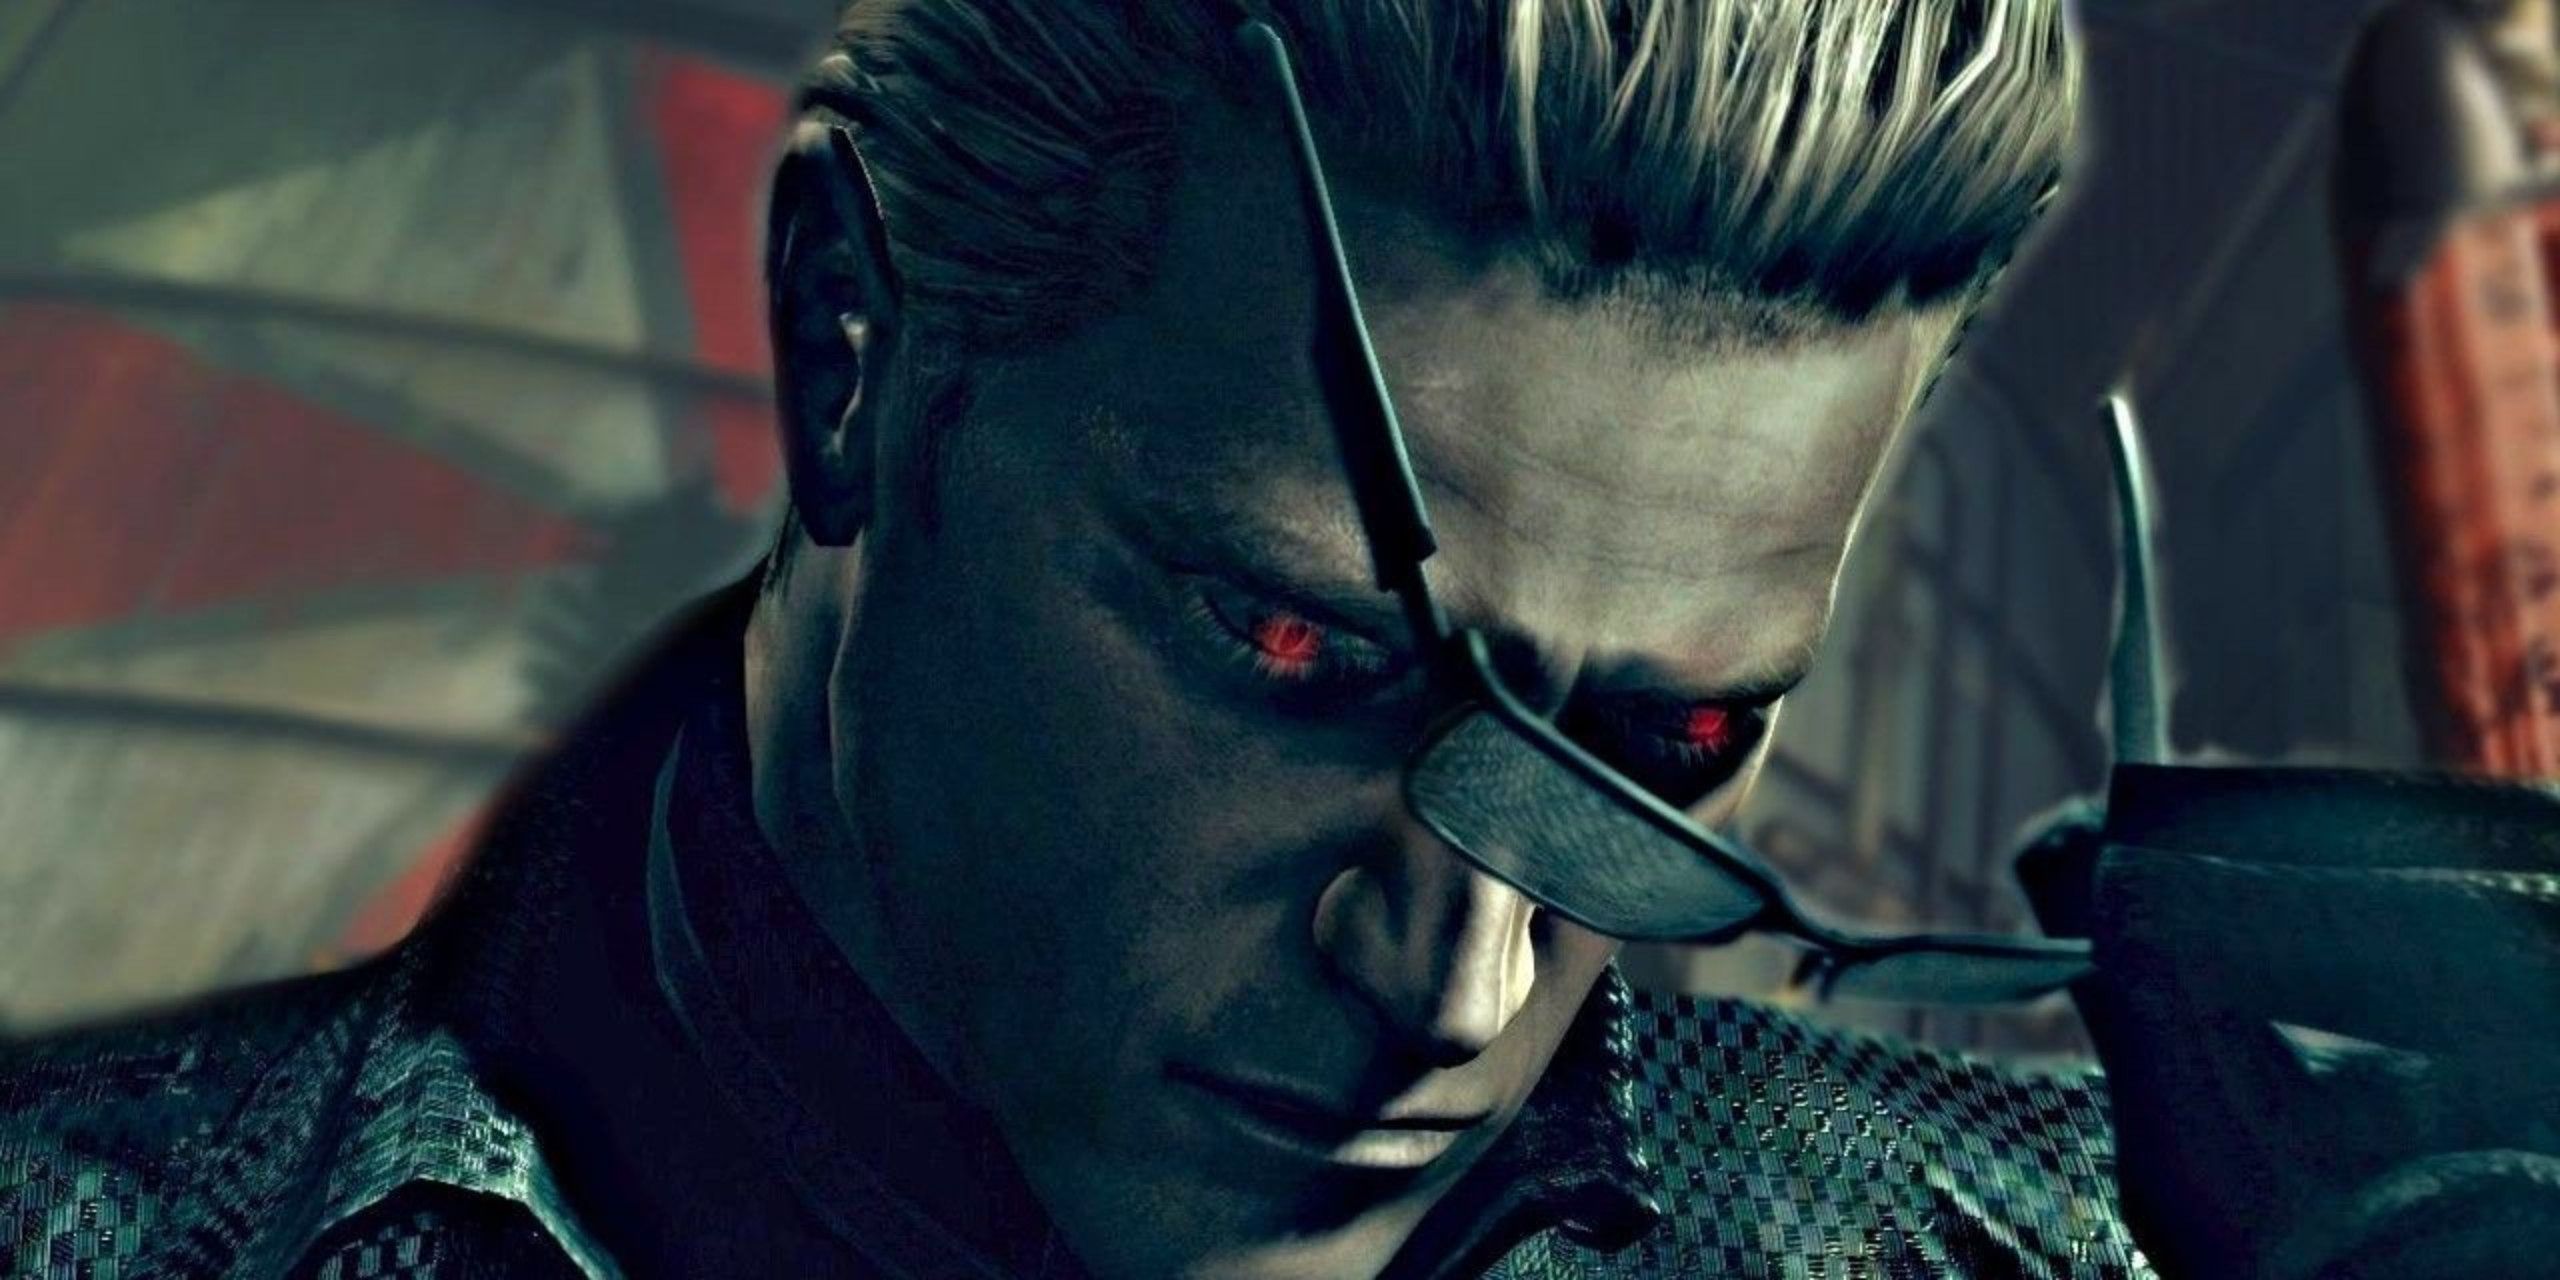 Wesker taking off his shades revealing his glowing red eyes with the Umbrella Corp logo in the background